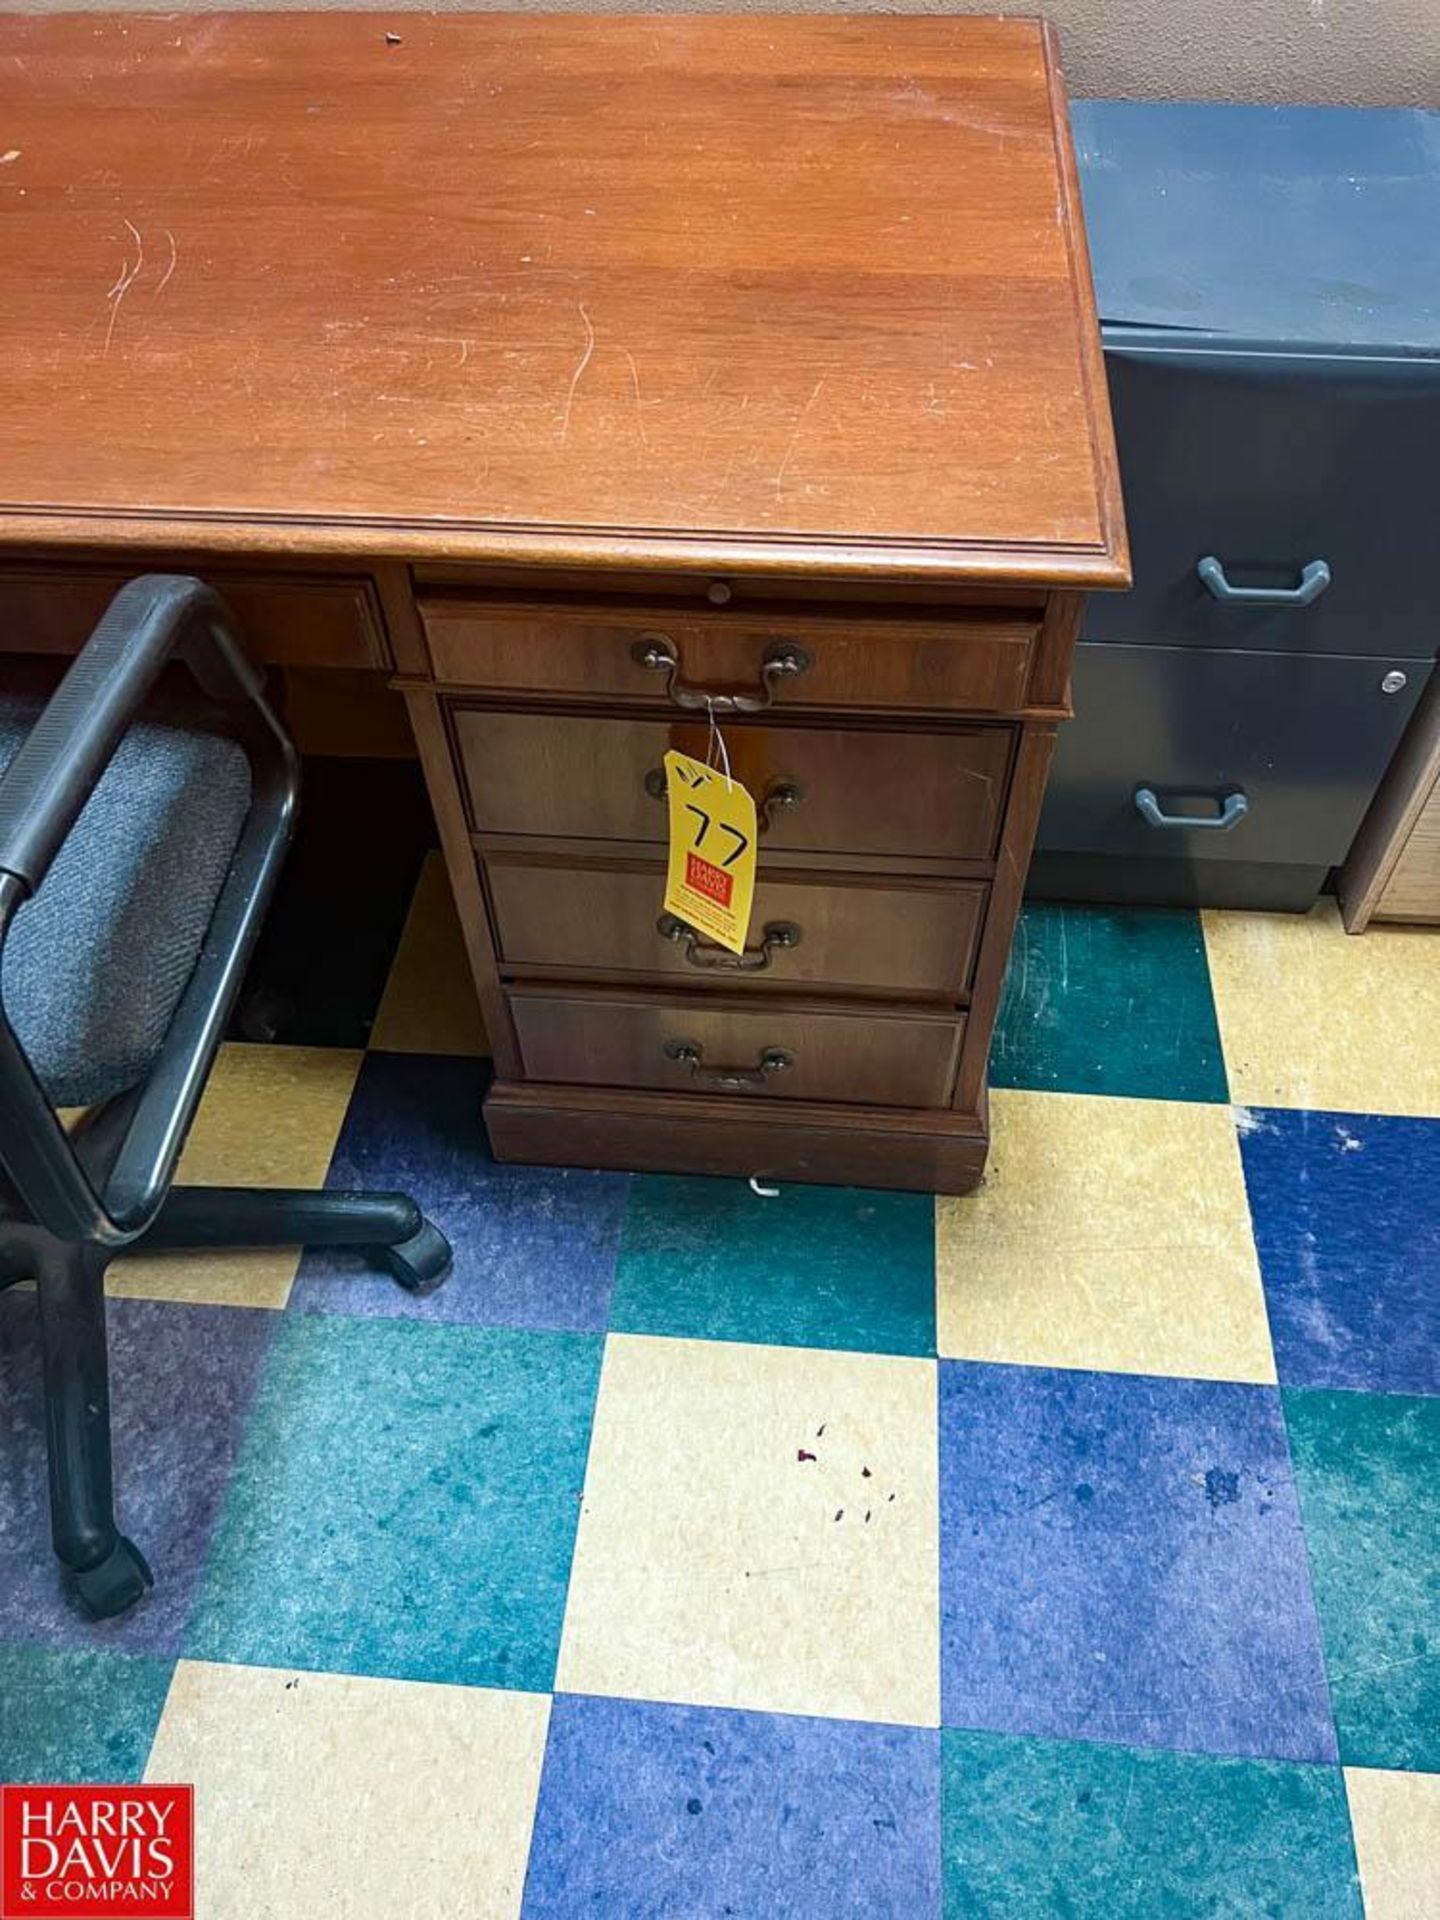 Assorted Desks with Filing Cabinets and Roller Chair - Rigging Fee: $400